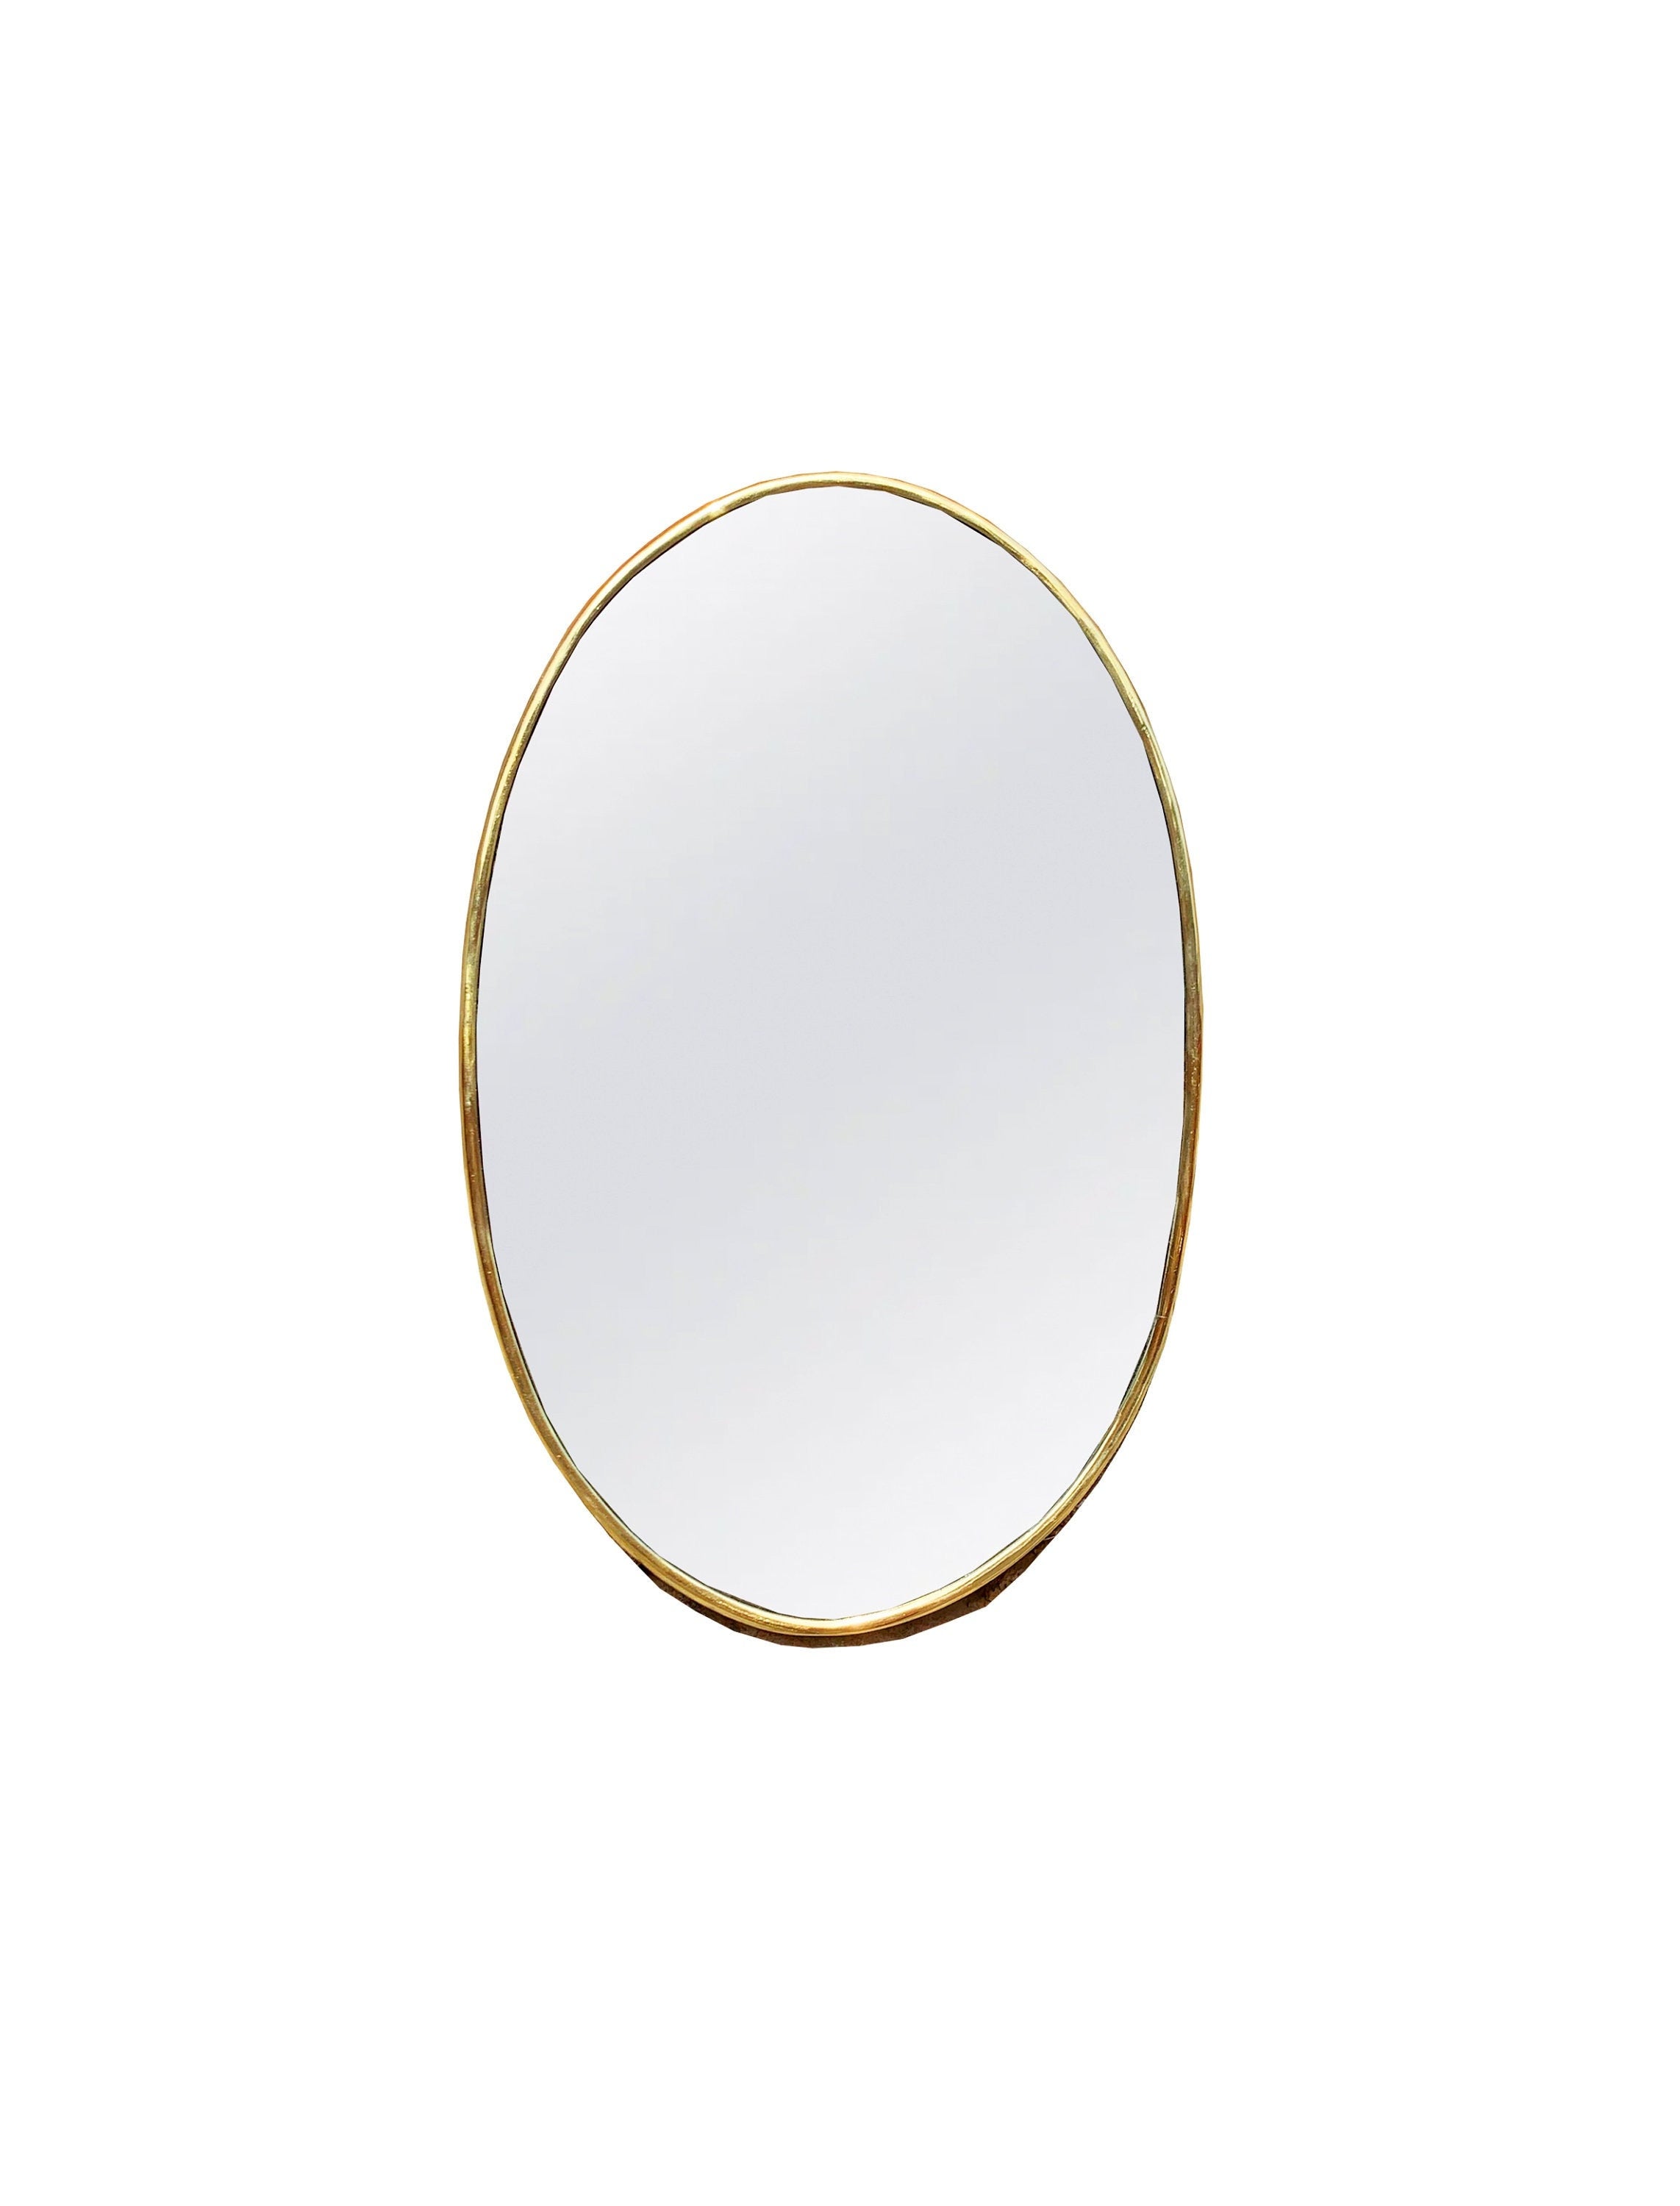 Handmade Oval Wall Mirror with Brass Frame | Decorative Home Mirrors - Zayian